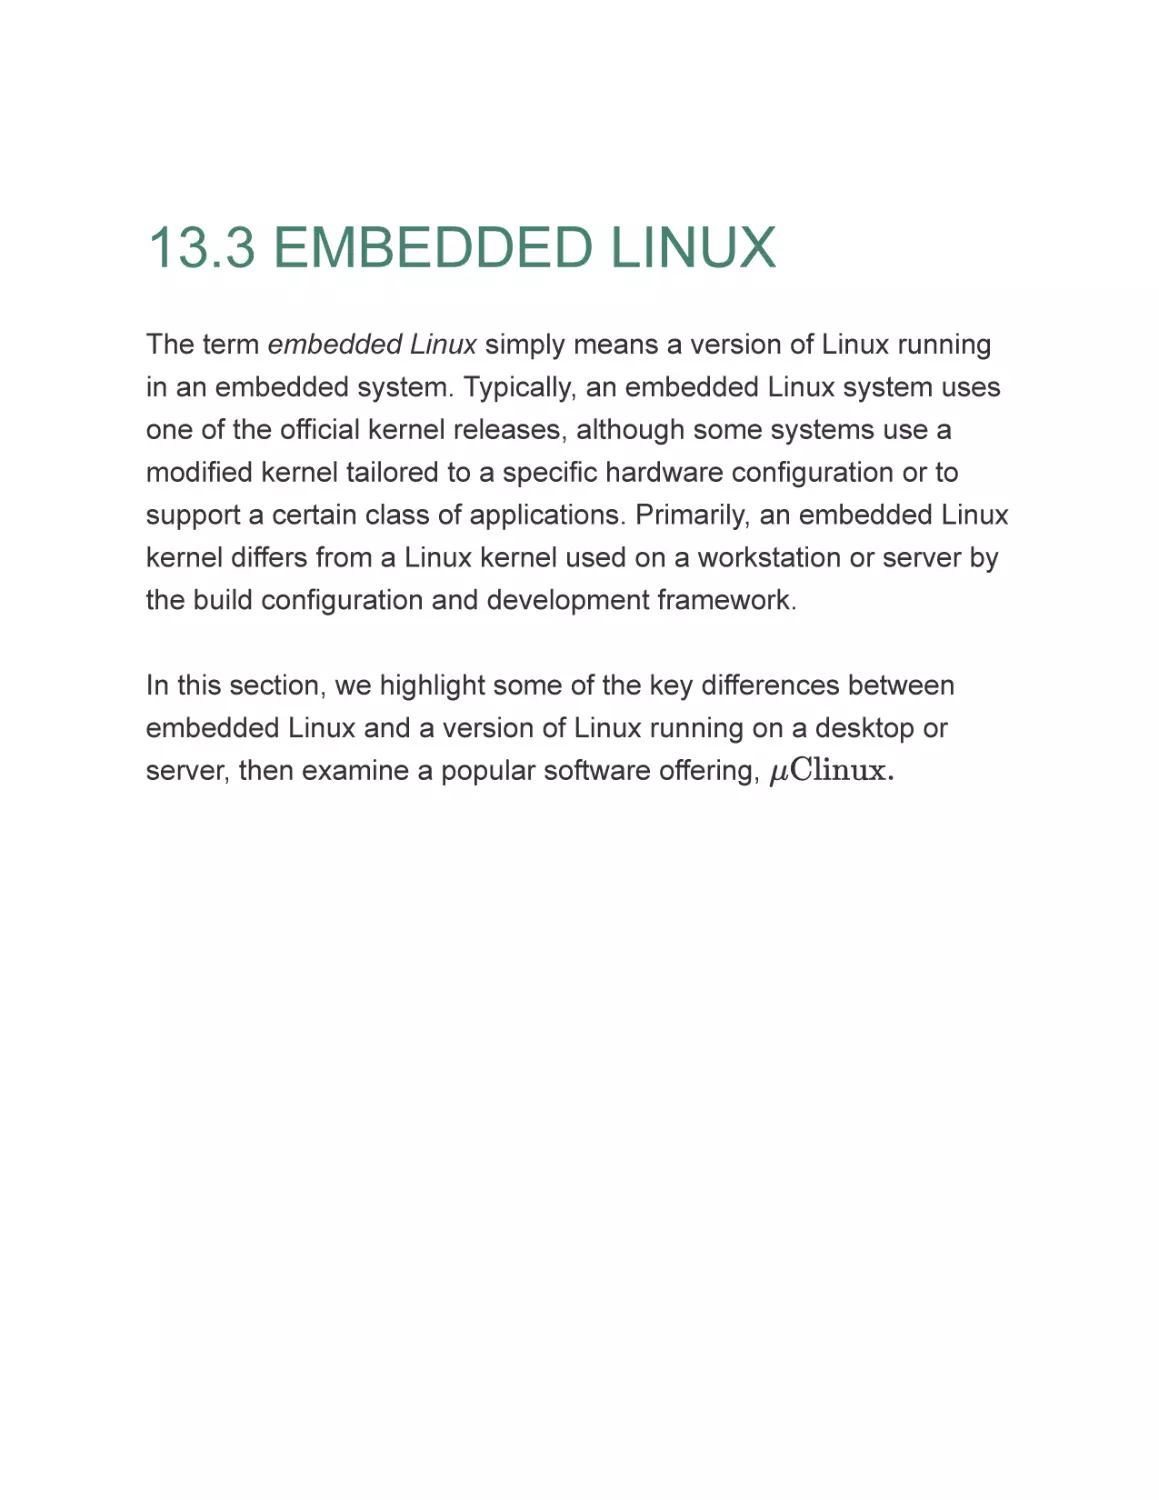 13.3 EMBEDDED LINUX